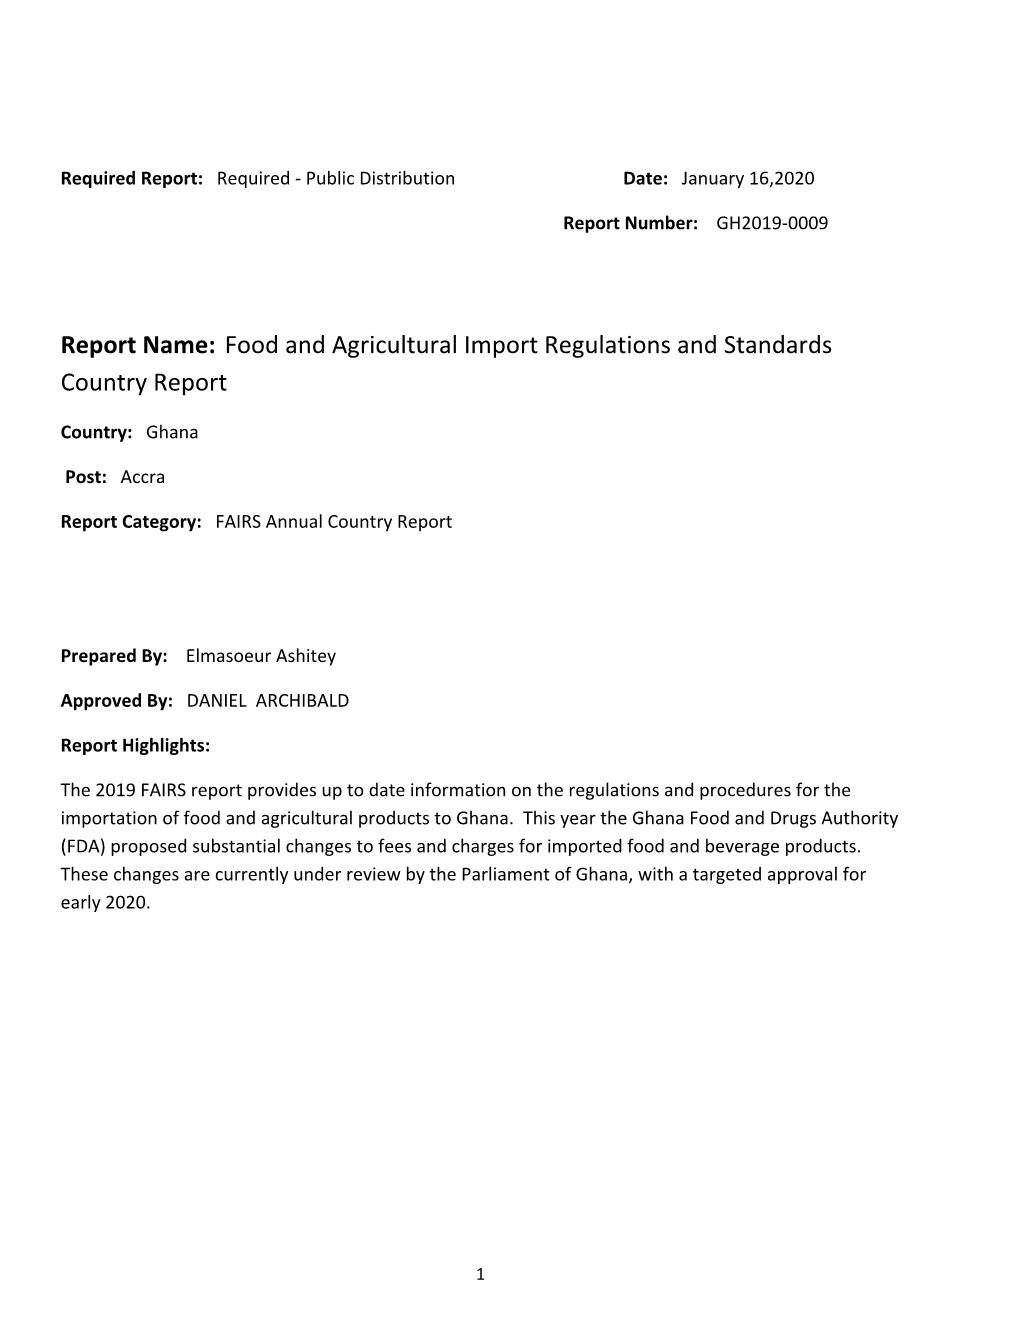 Report Name: Food and Agricultural Import Regulations and Standards Country Report